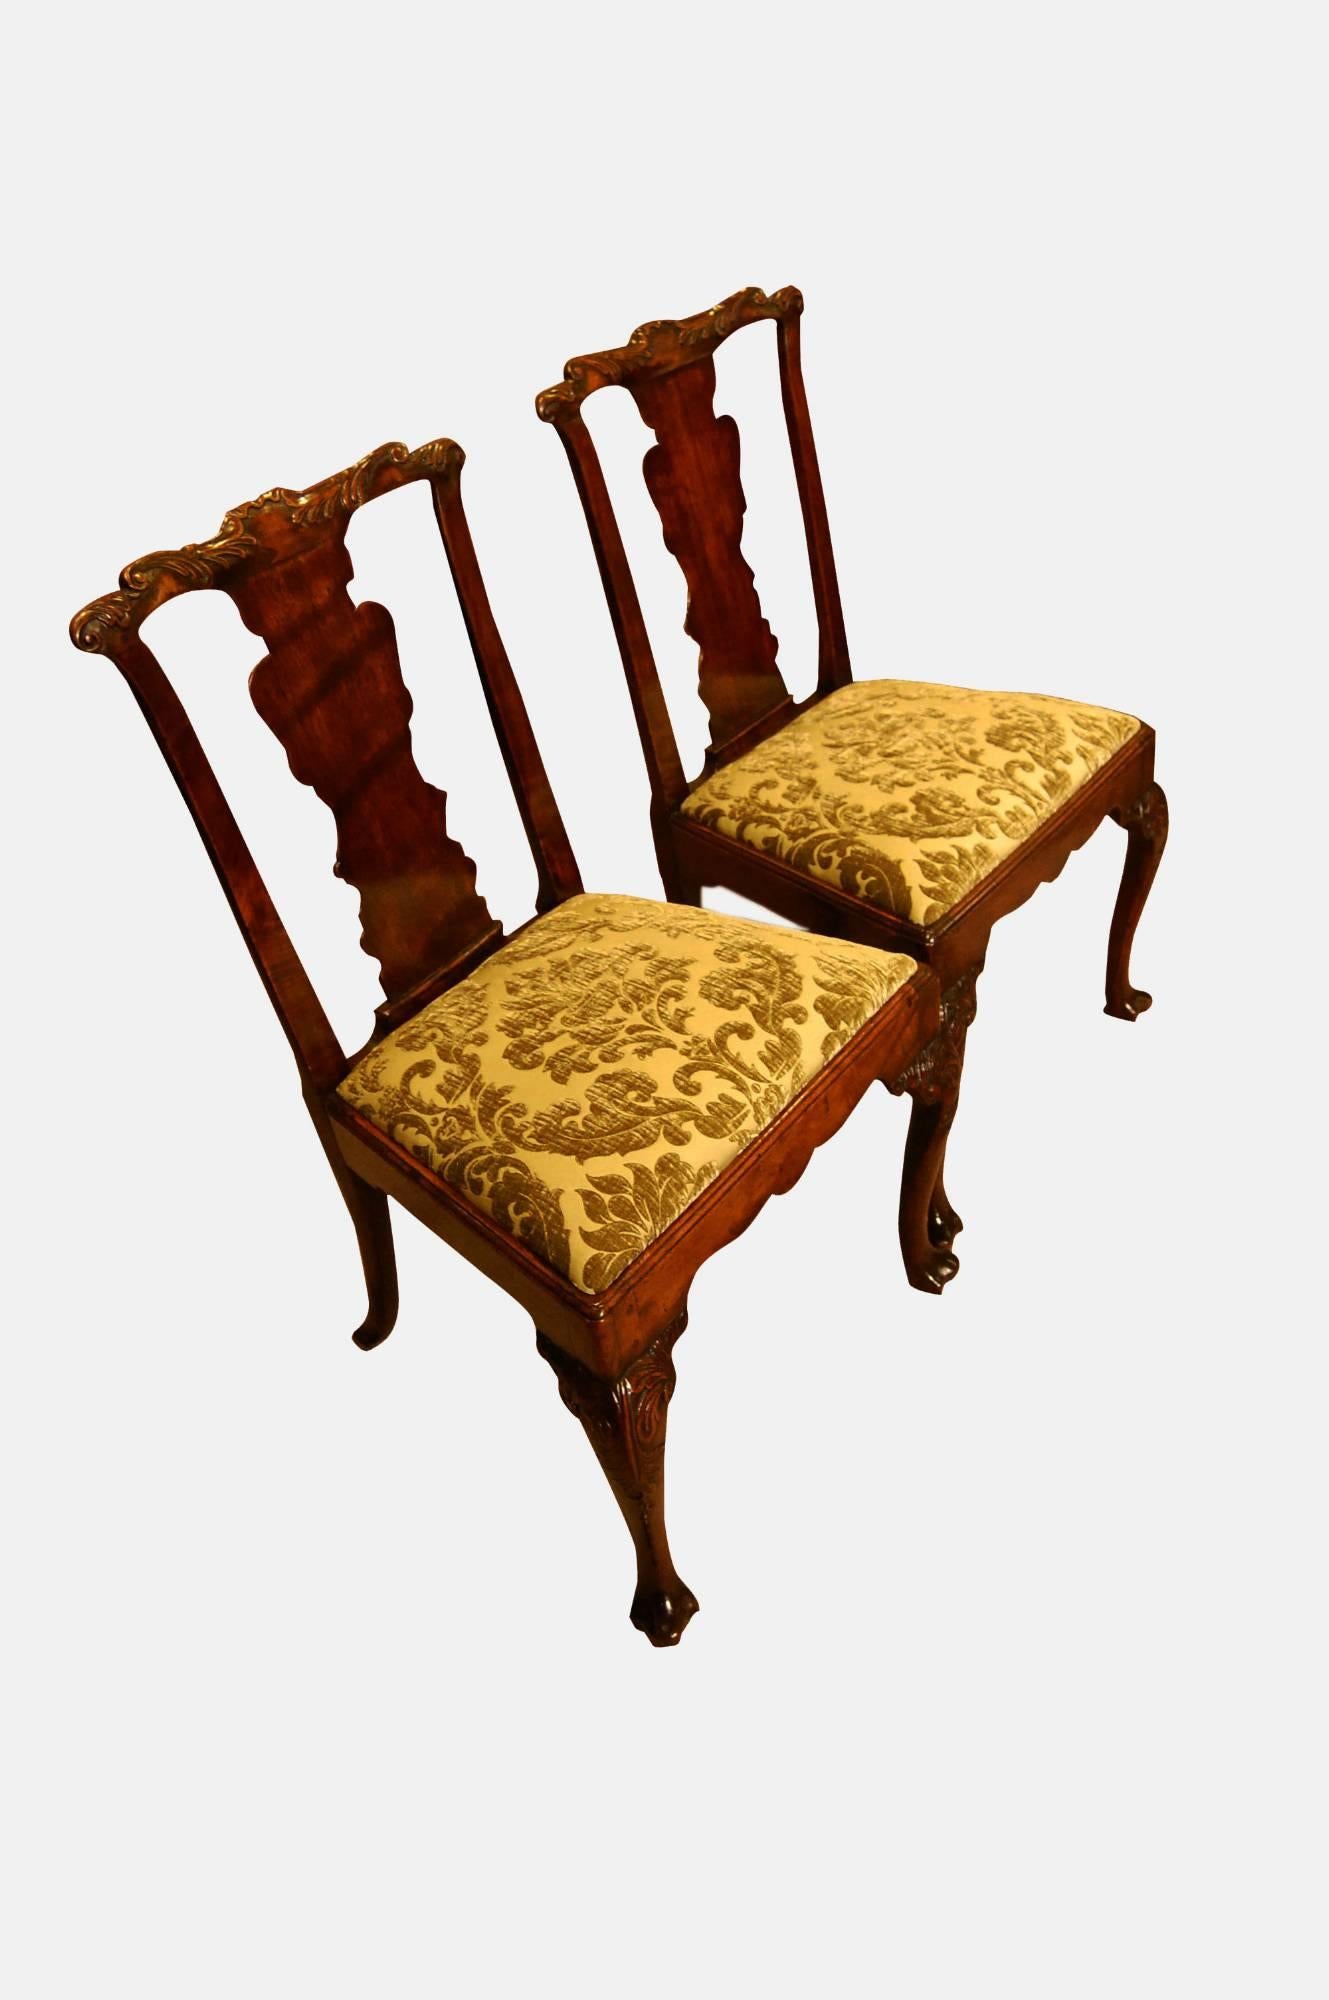 A fine and rare pair of George III cabriole chairs

The top rail has leafy scrolling acanthus above solid bluster shaped splats 

The legs also carved with acanthus

Possibly Irish

circa 1740.